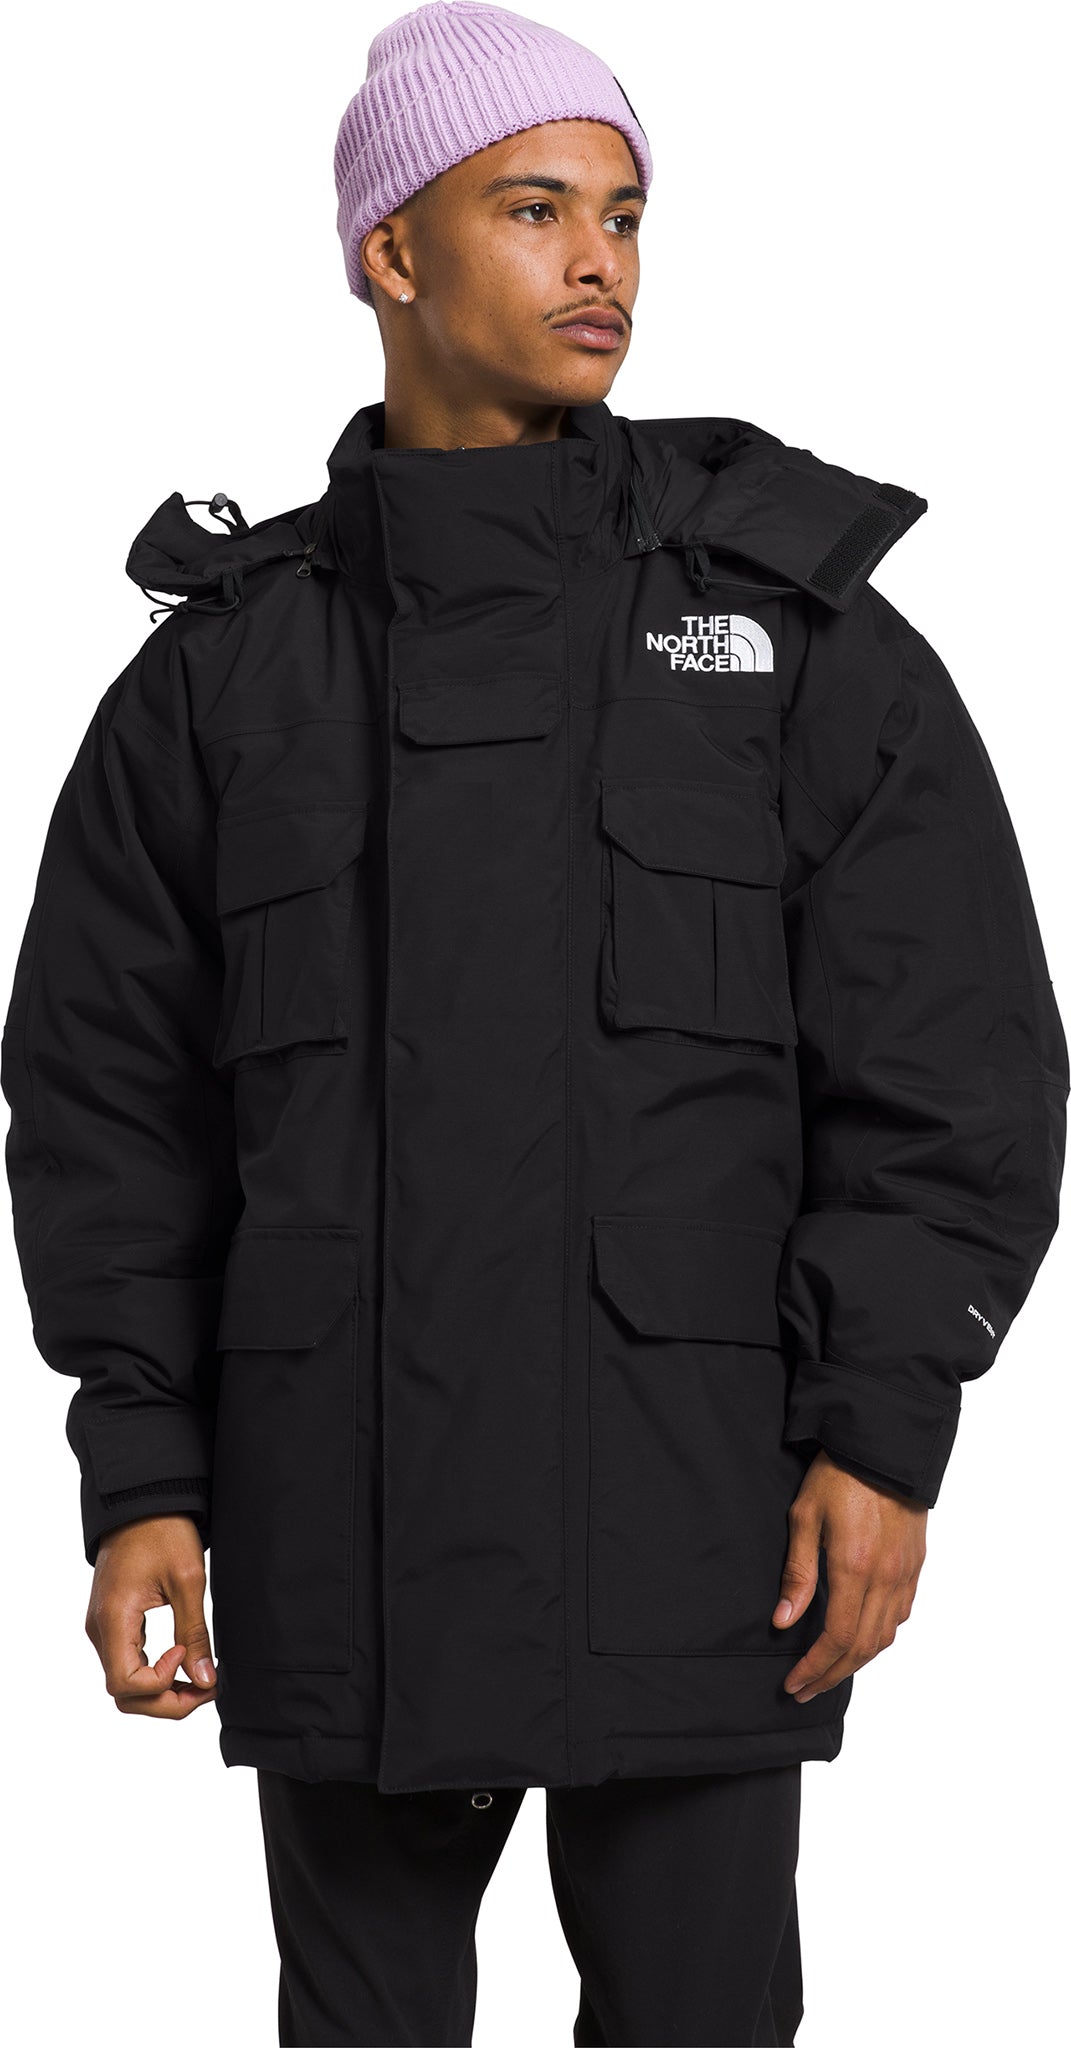 The North Face Coldworks Insulated Parka - Men’s